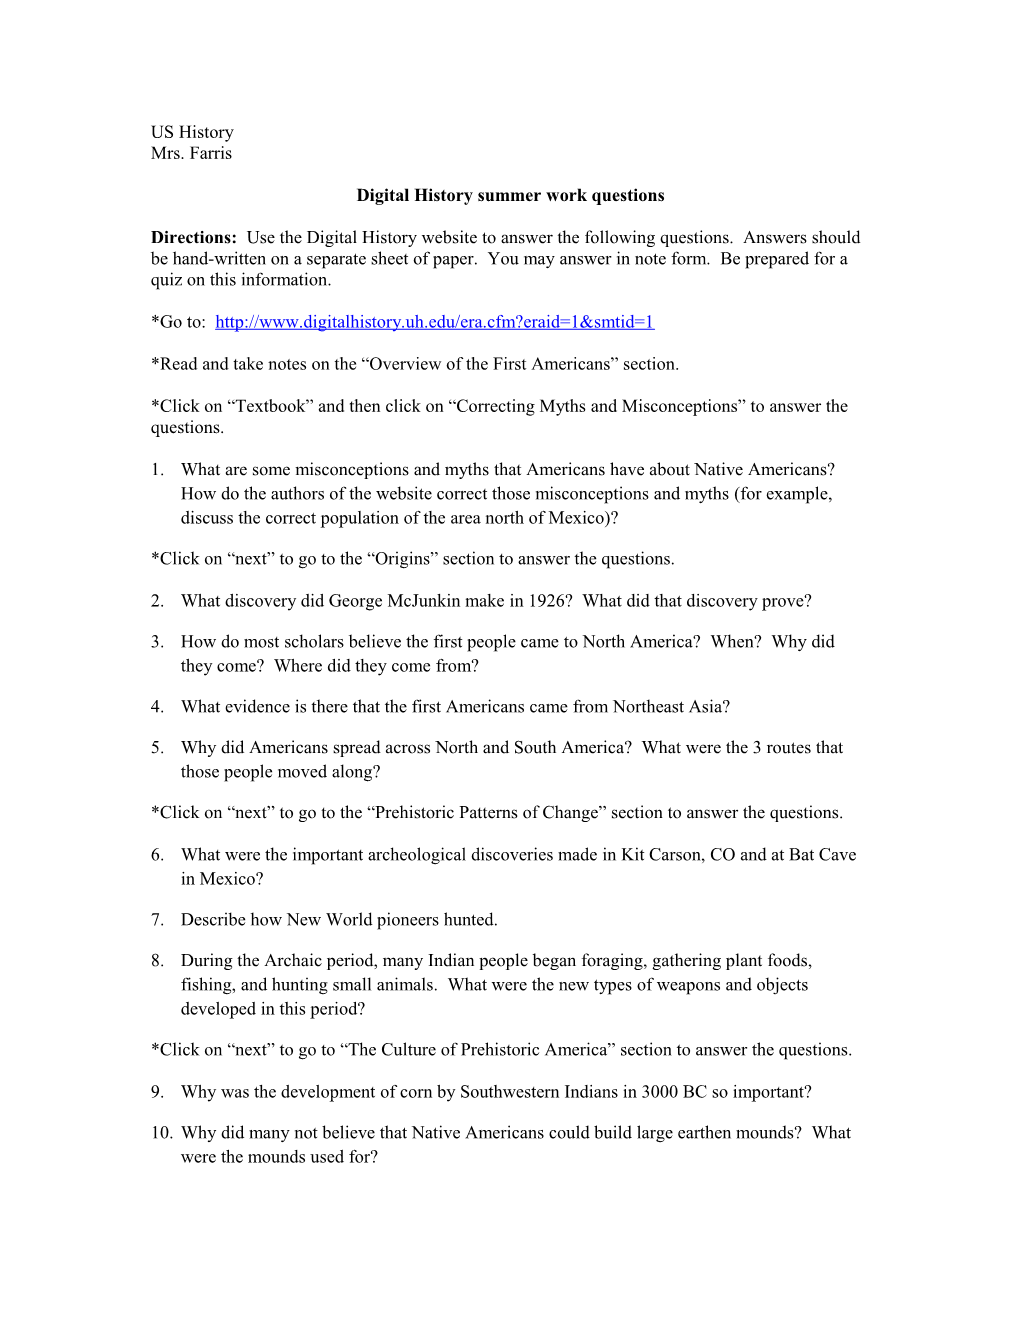 You Should Complete the Assignment from the Digital History Website